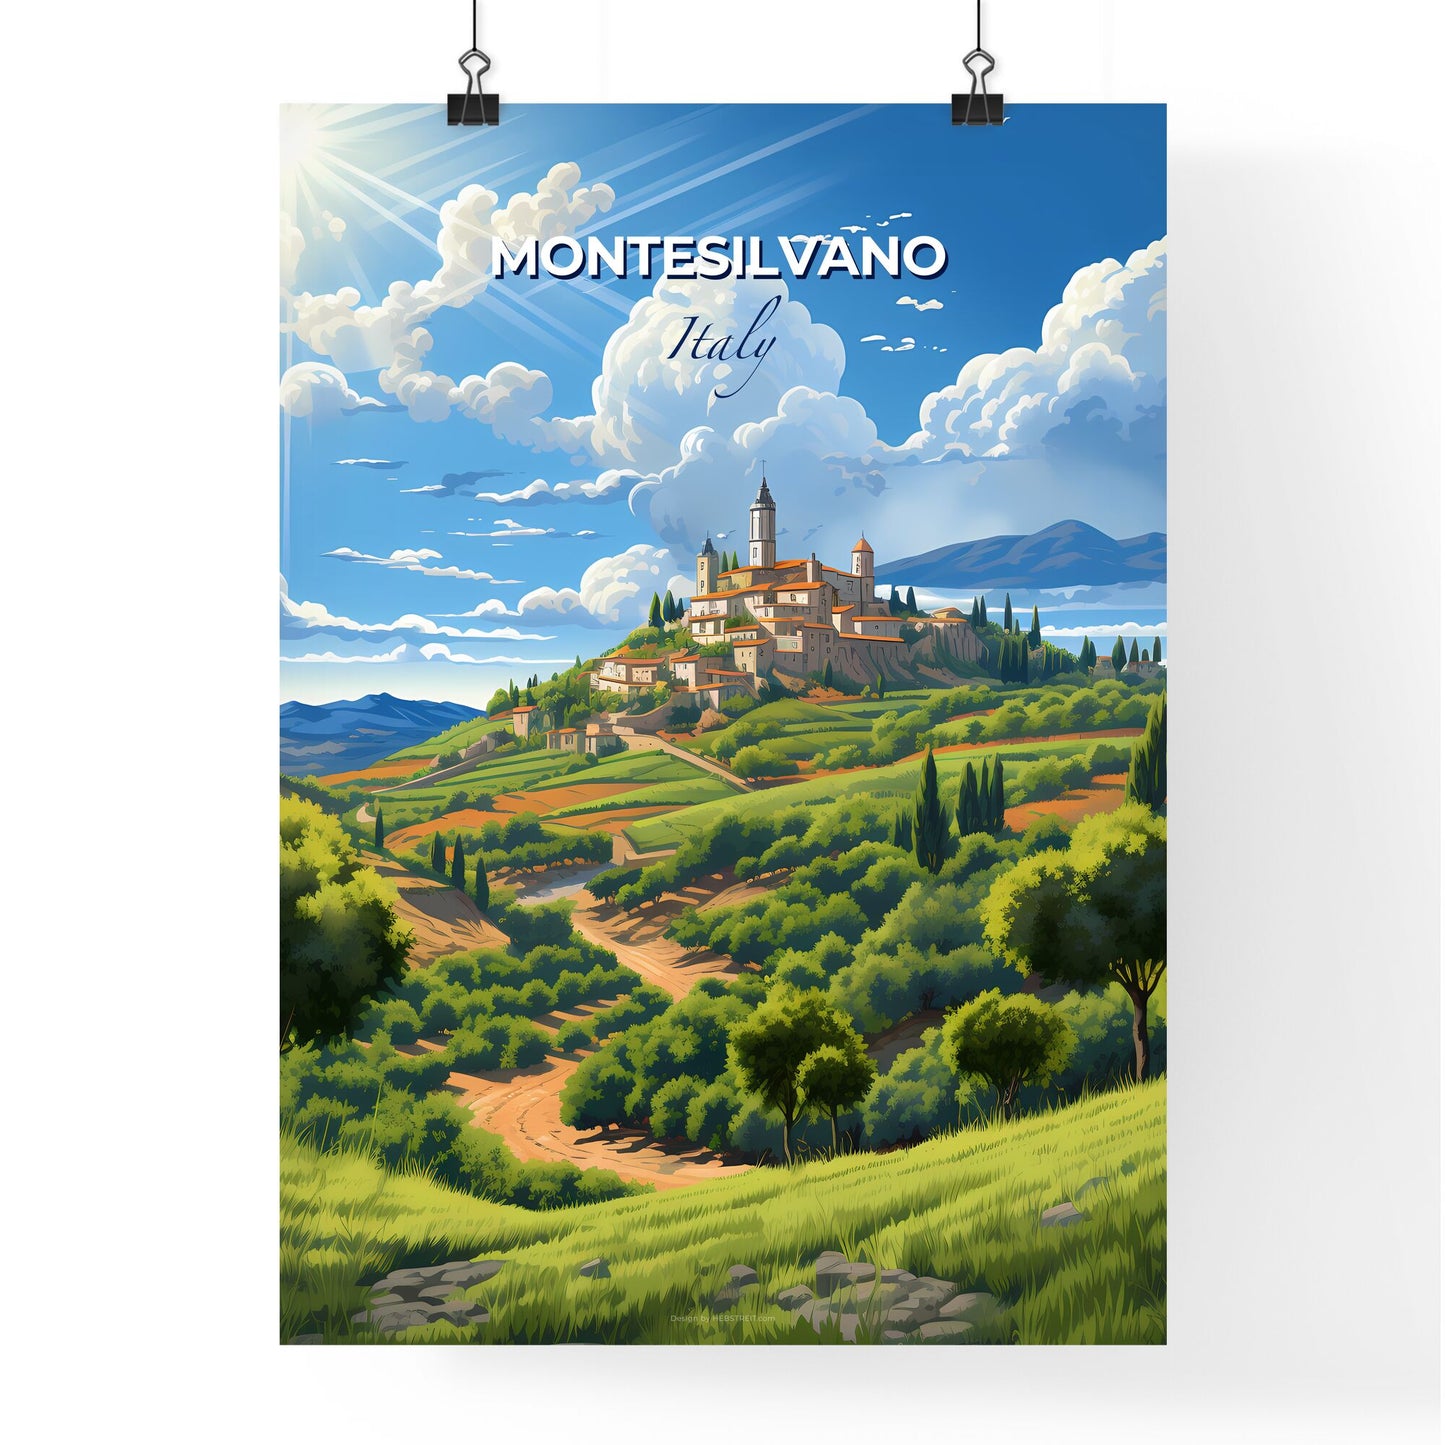 Montesilvano, Italy, A Poster of a landscape with a castle on a hill Default Title